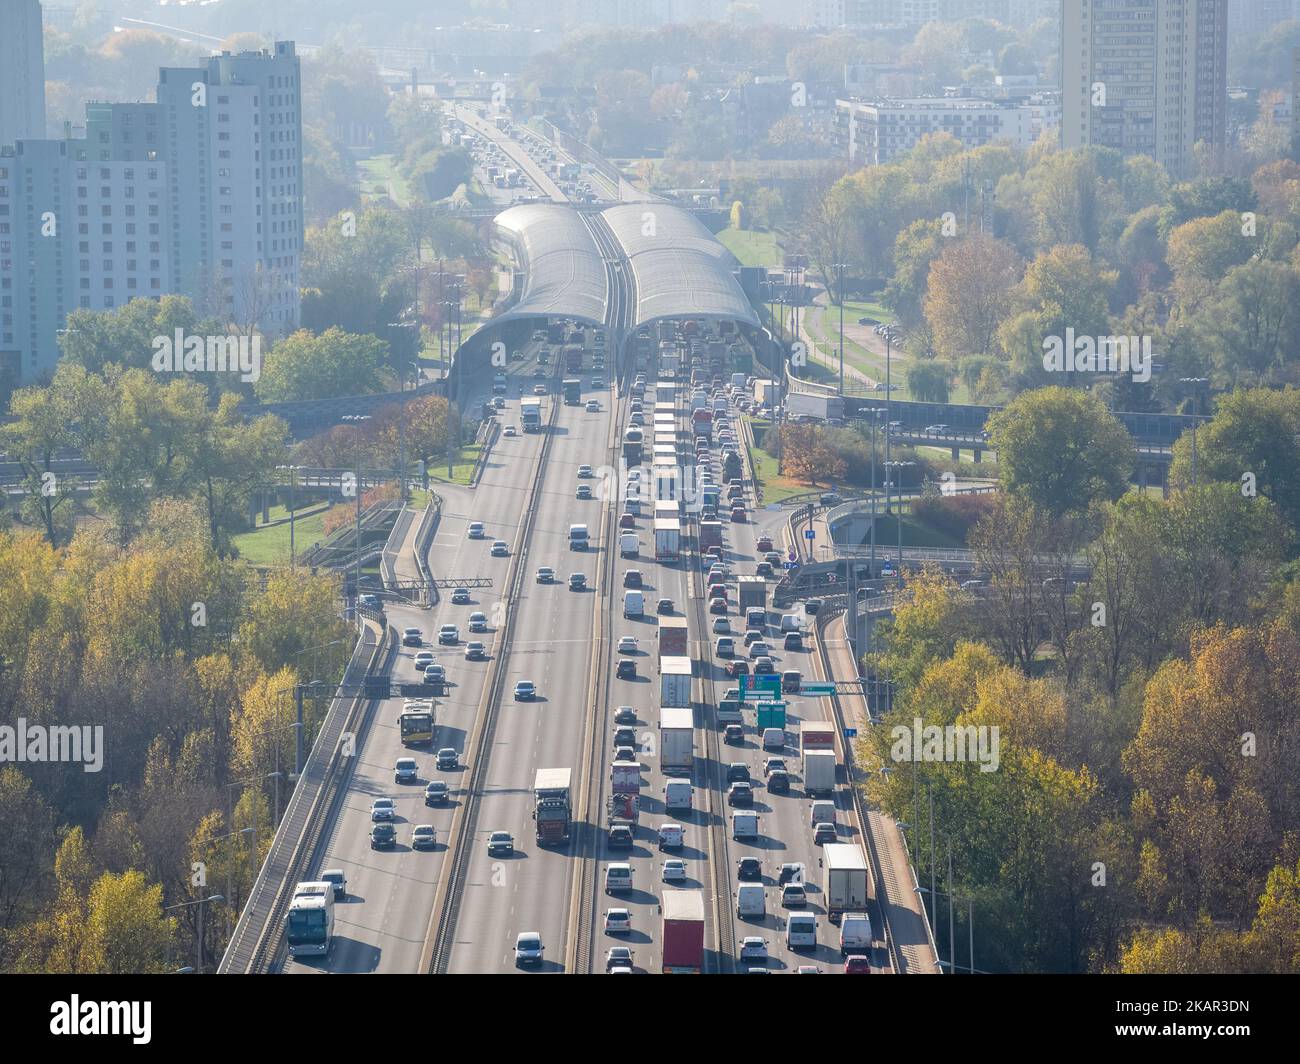 Traffic jam on city ring road, aerial landscape Stock Photo